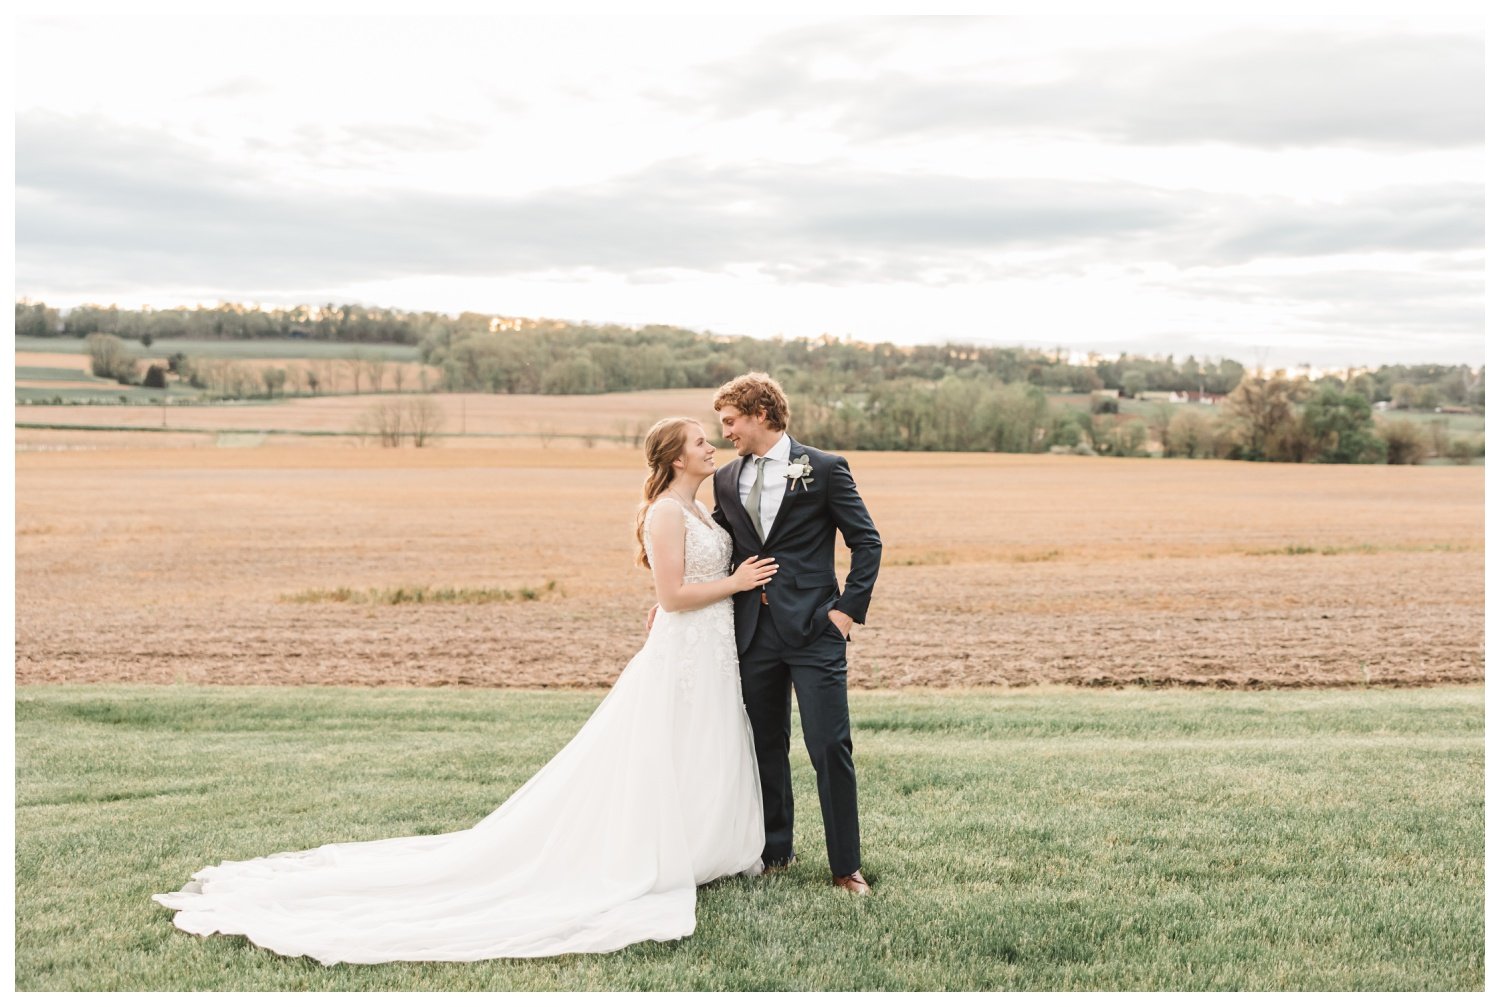 Harvest View Barn at Hershey Farms Wedding, sunset pictures